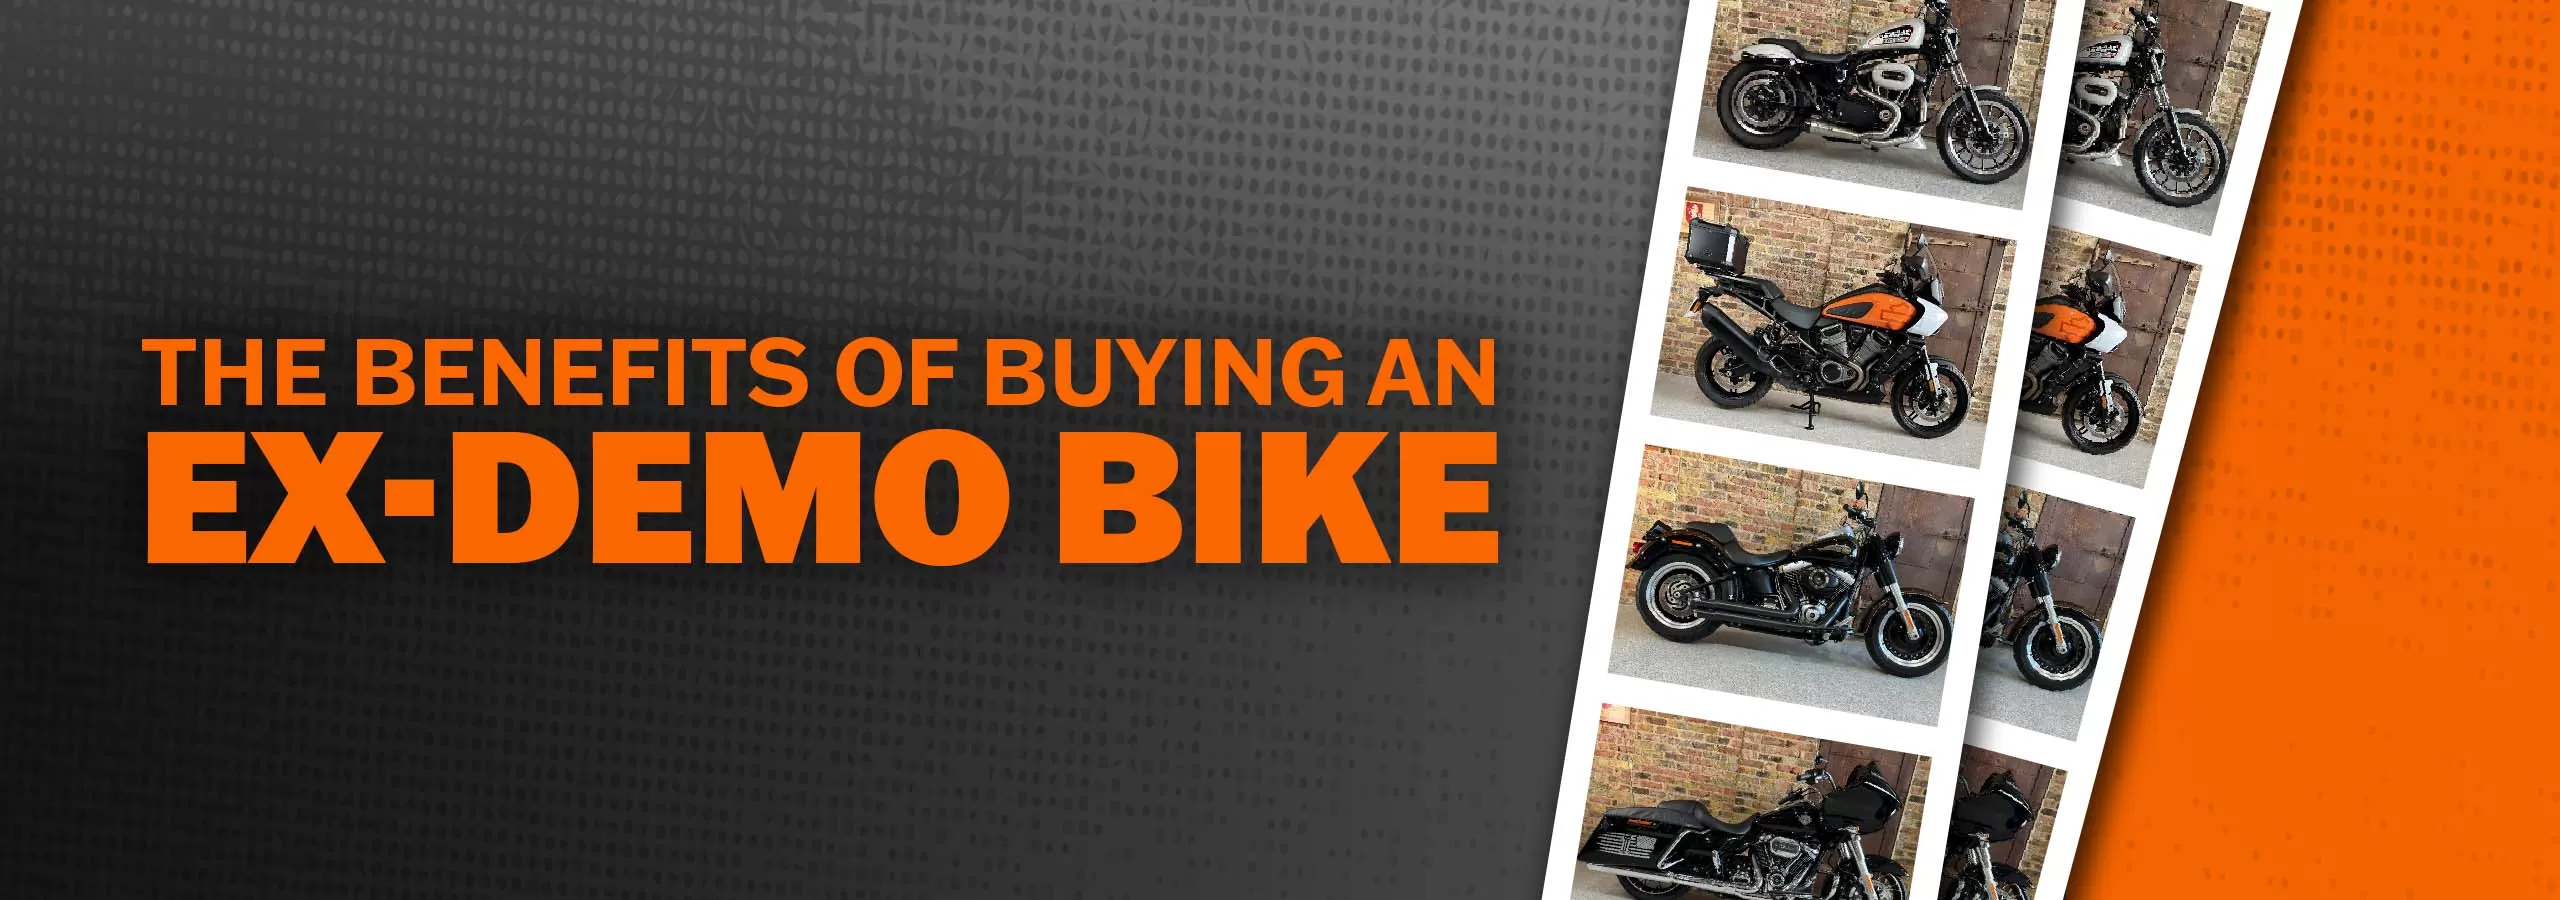 The Benefits of Buying an Ex-Demo Bike from Laguna Motorcycles